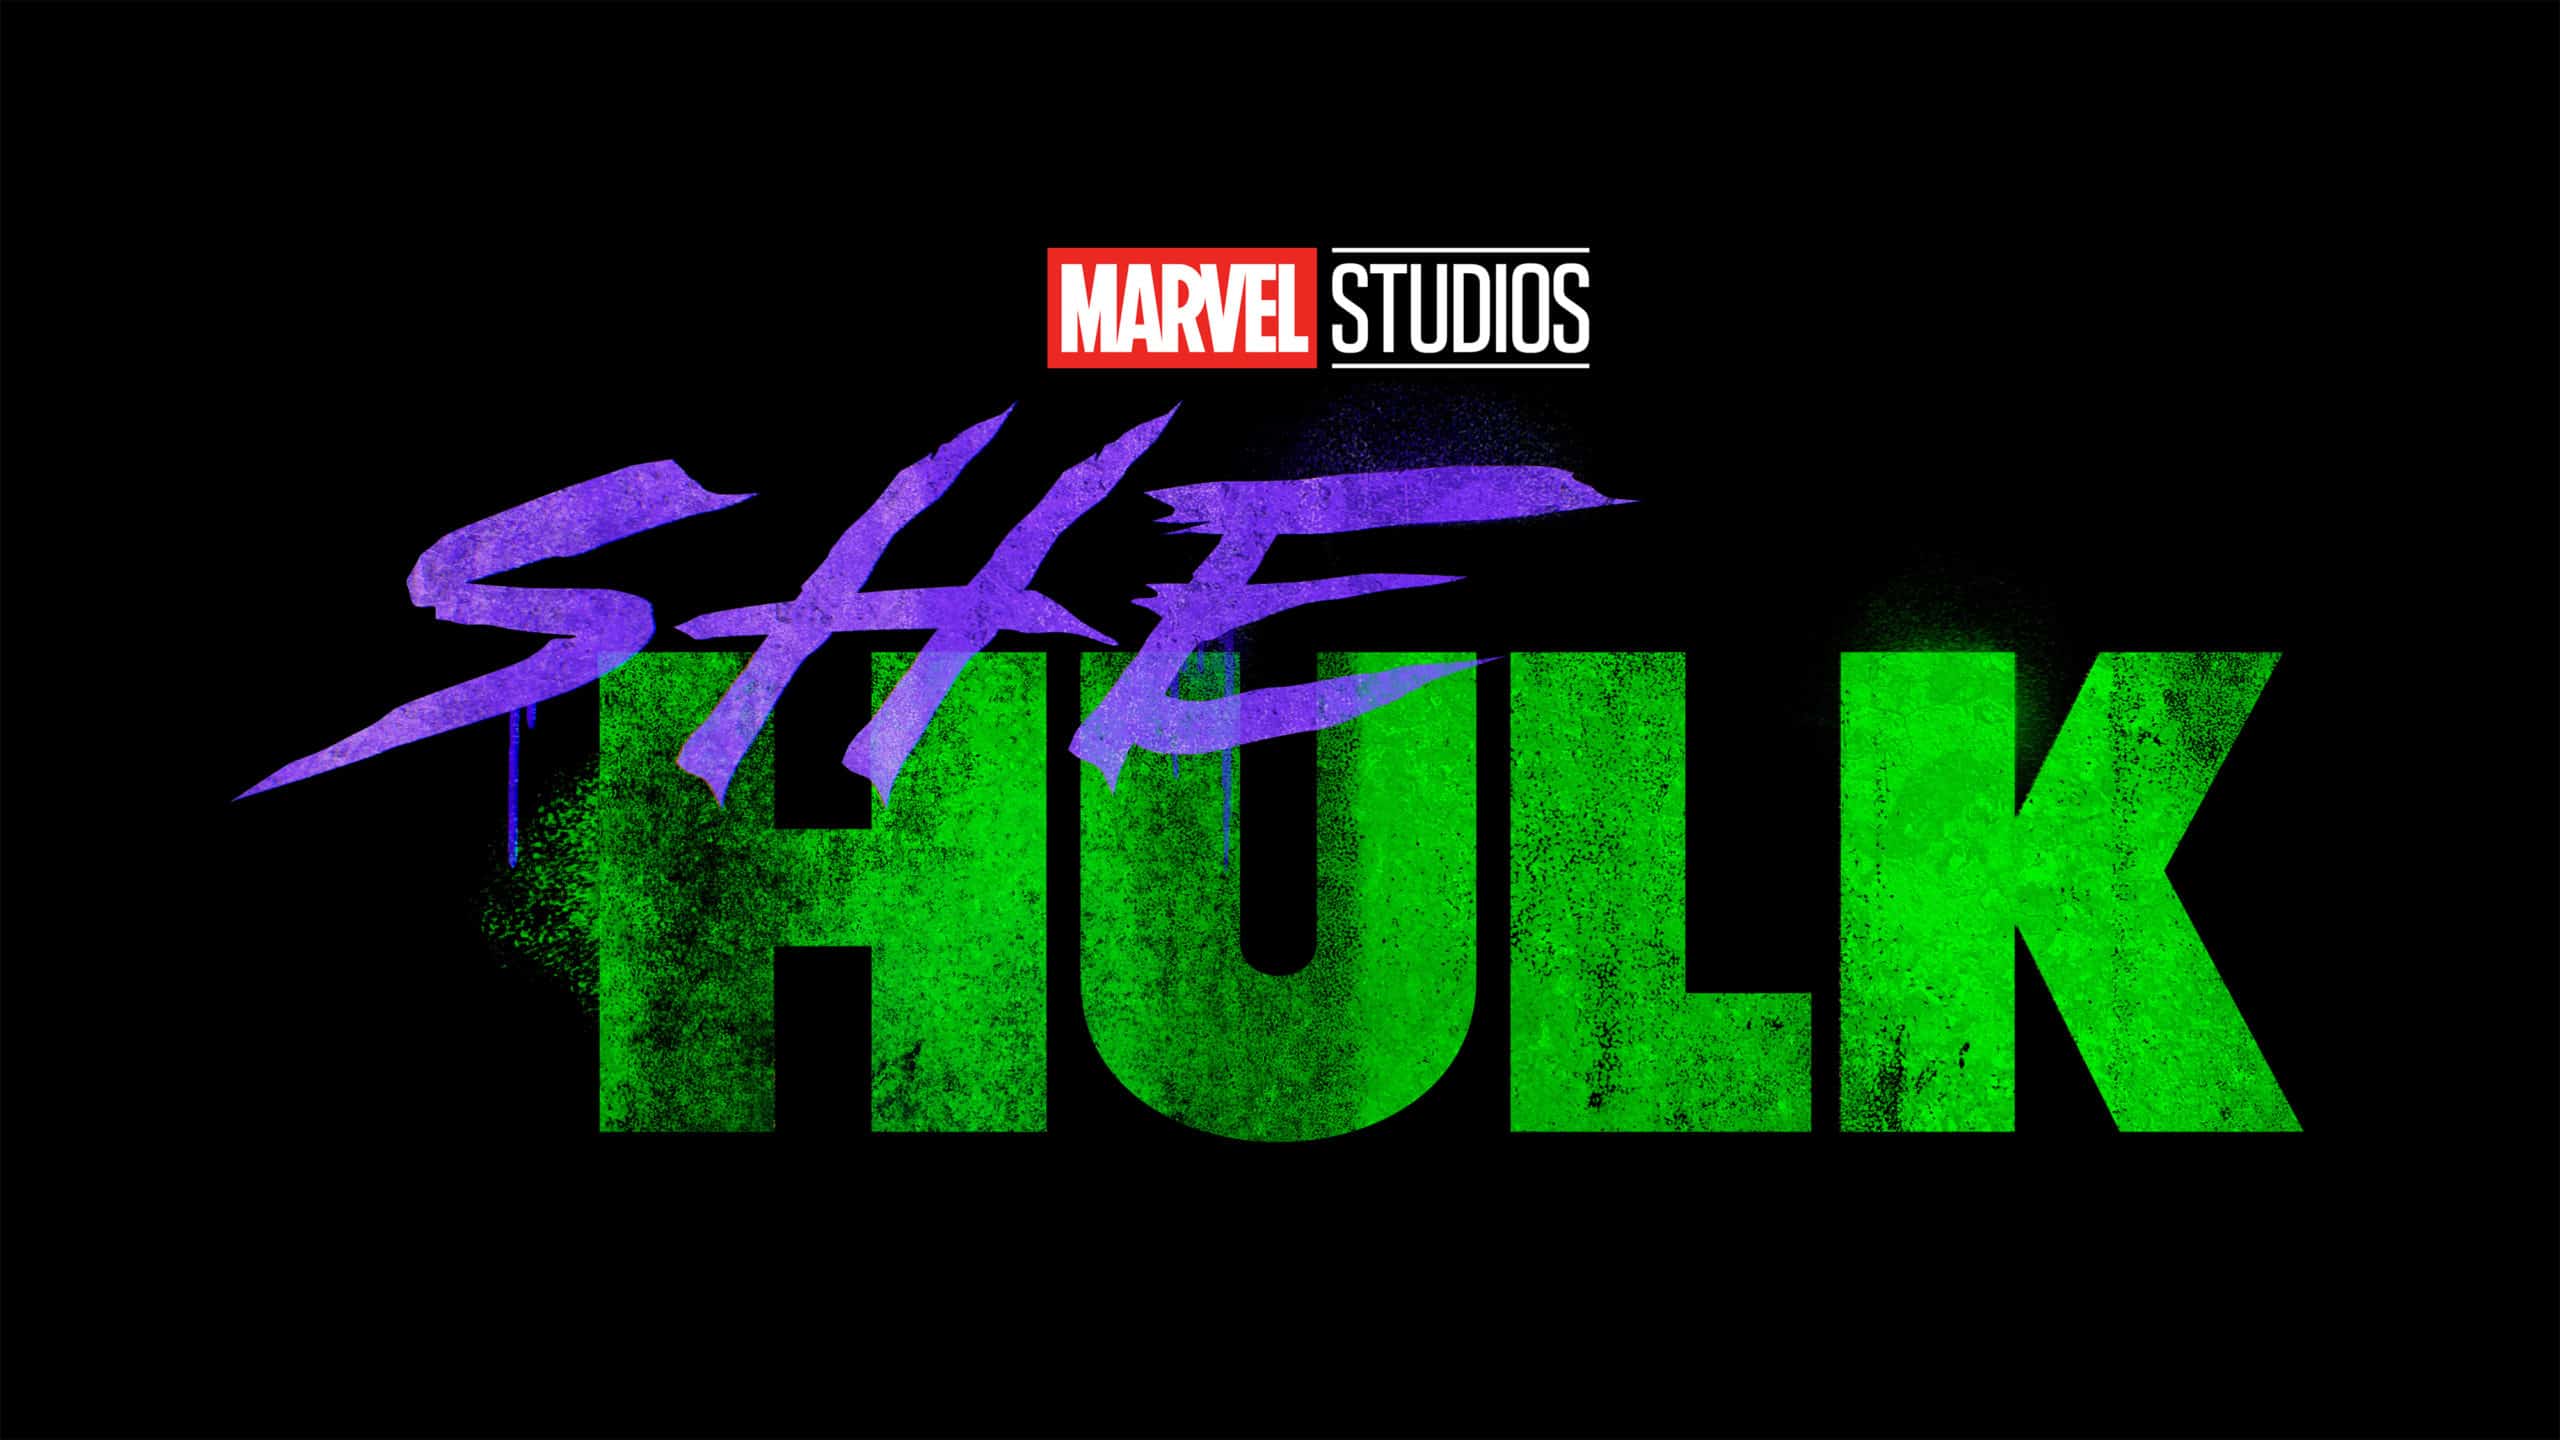 Everything You To Need Know About Marvel’s “She-Hulk” TV Series